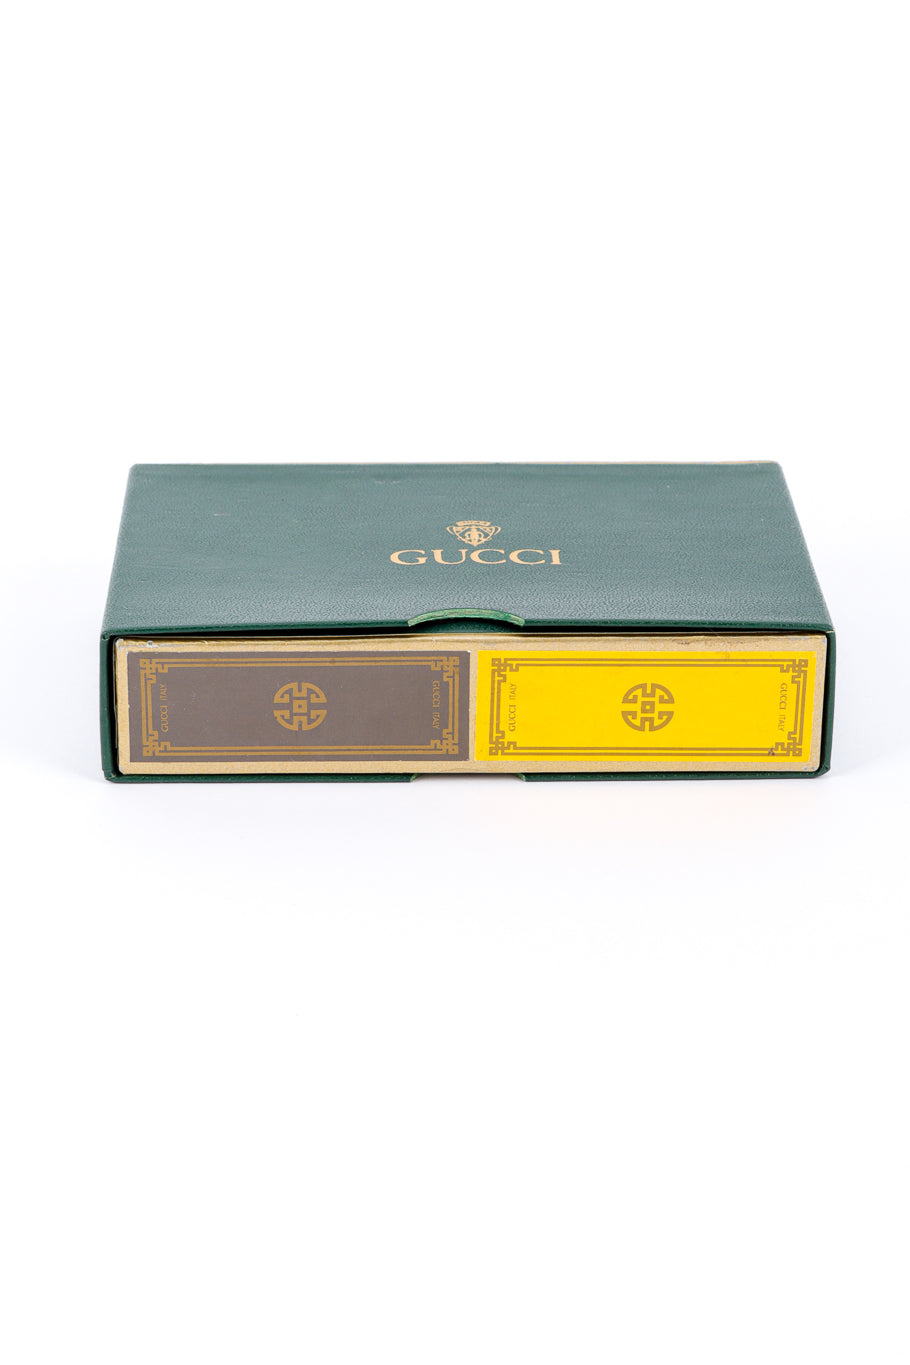 Vintage Gucci Yellow and Grey 2 Deck Playing Card Set cards in box @recessla